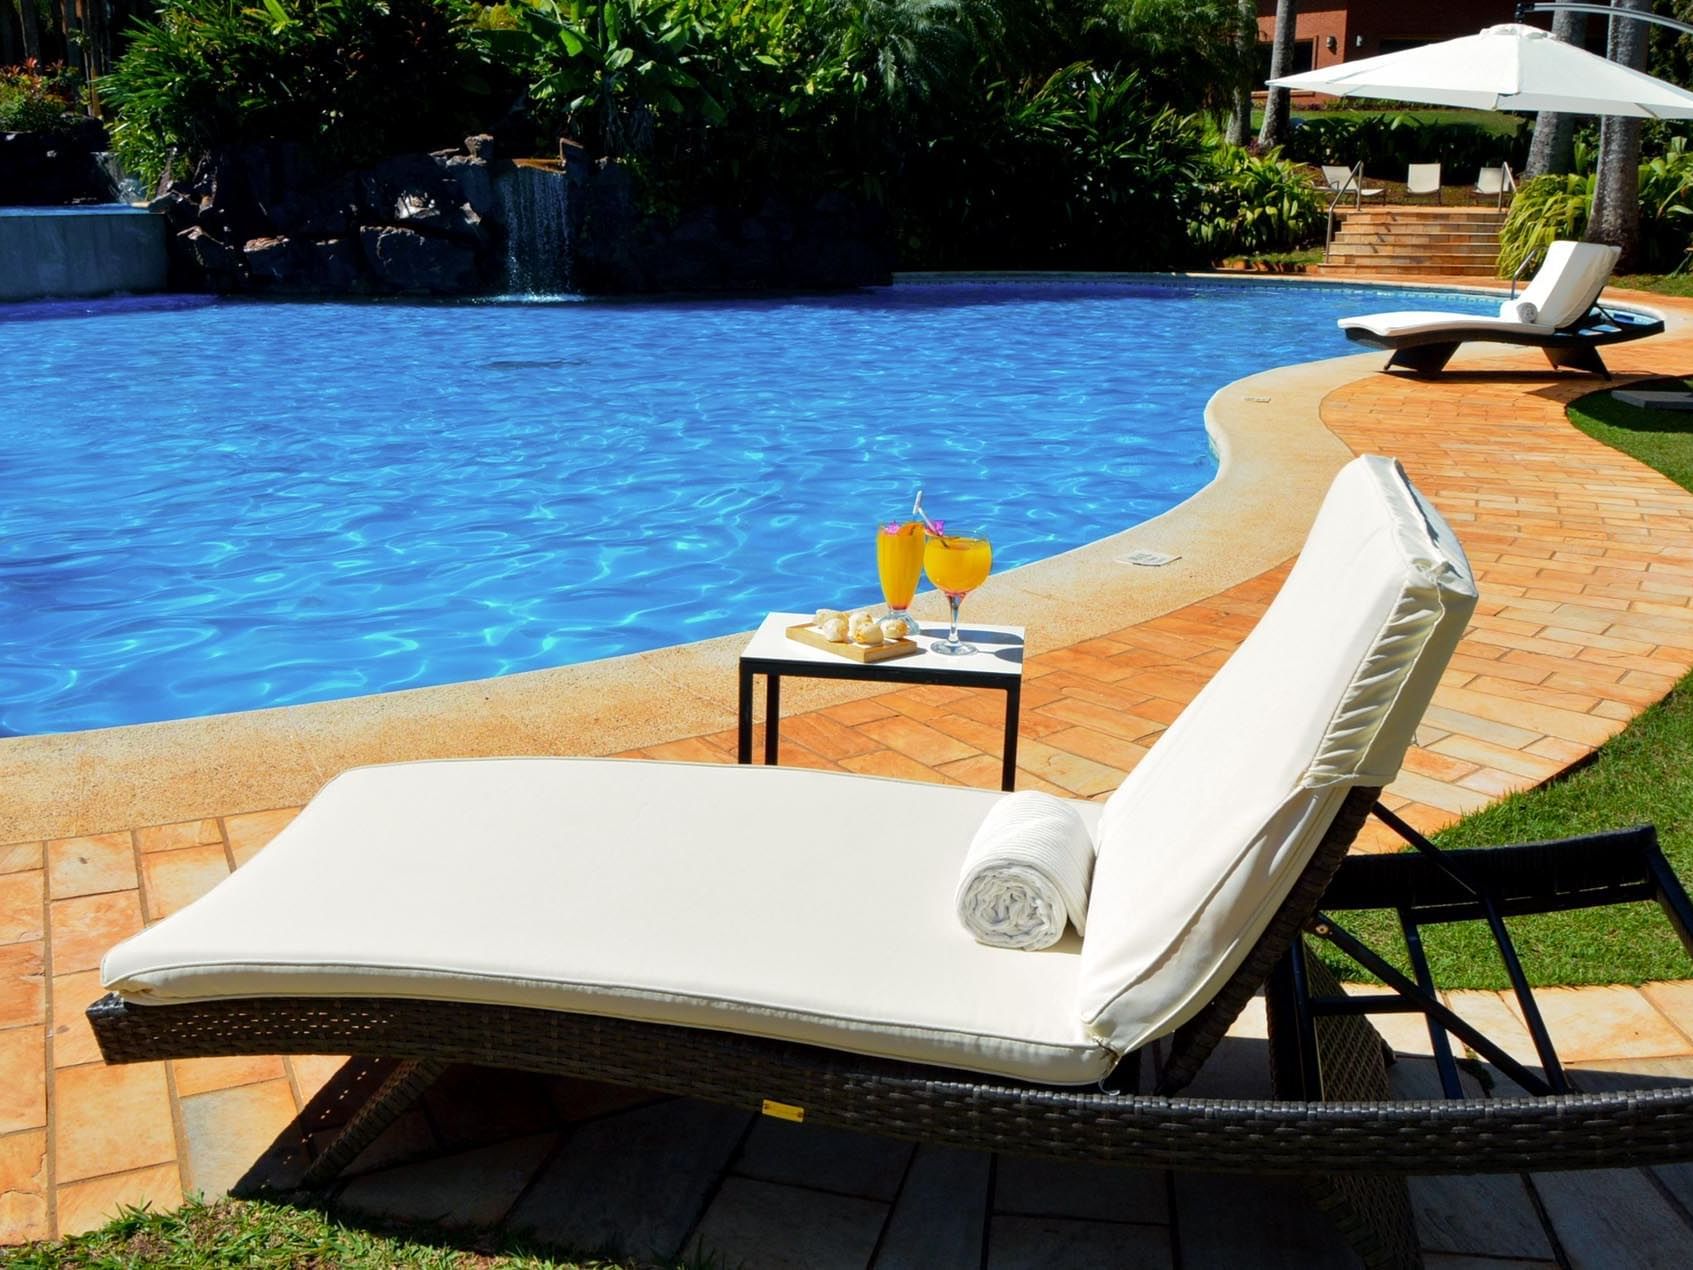 A Sunbed by the pool in Pool Bar at Iguazu Grand Resort